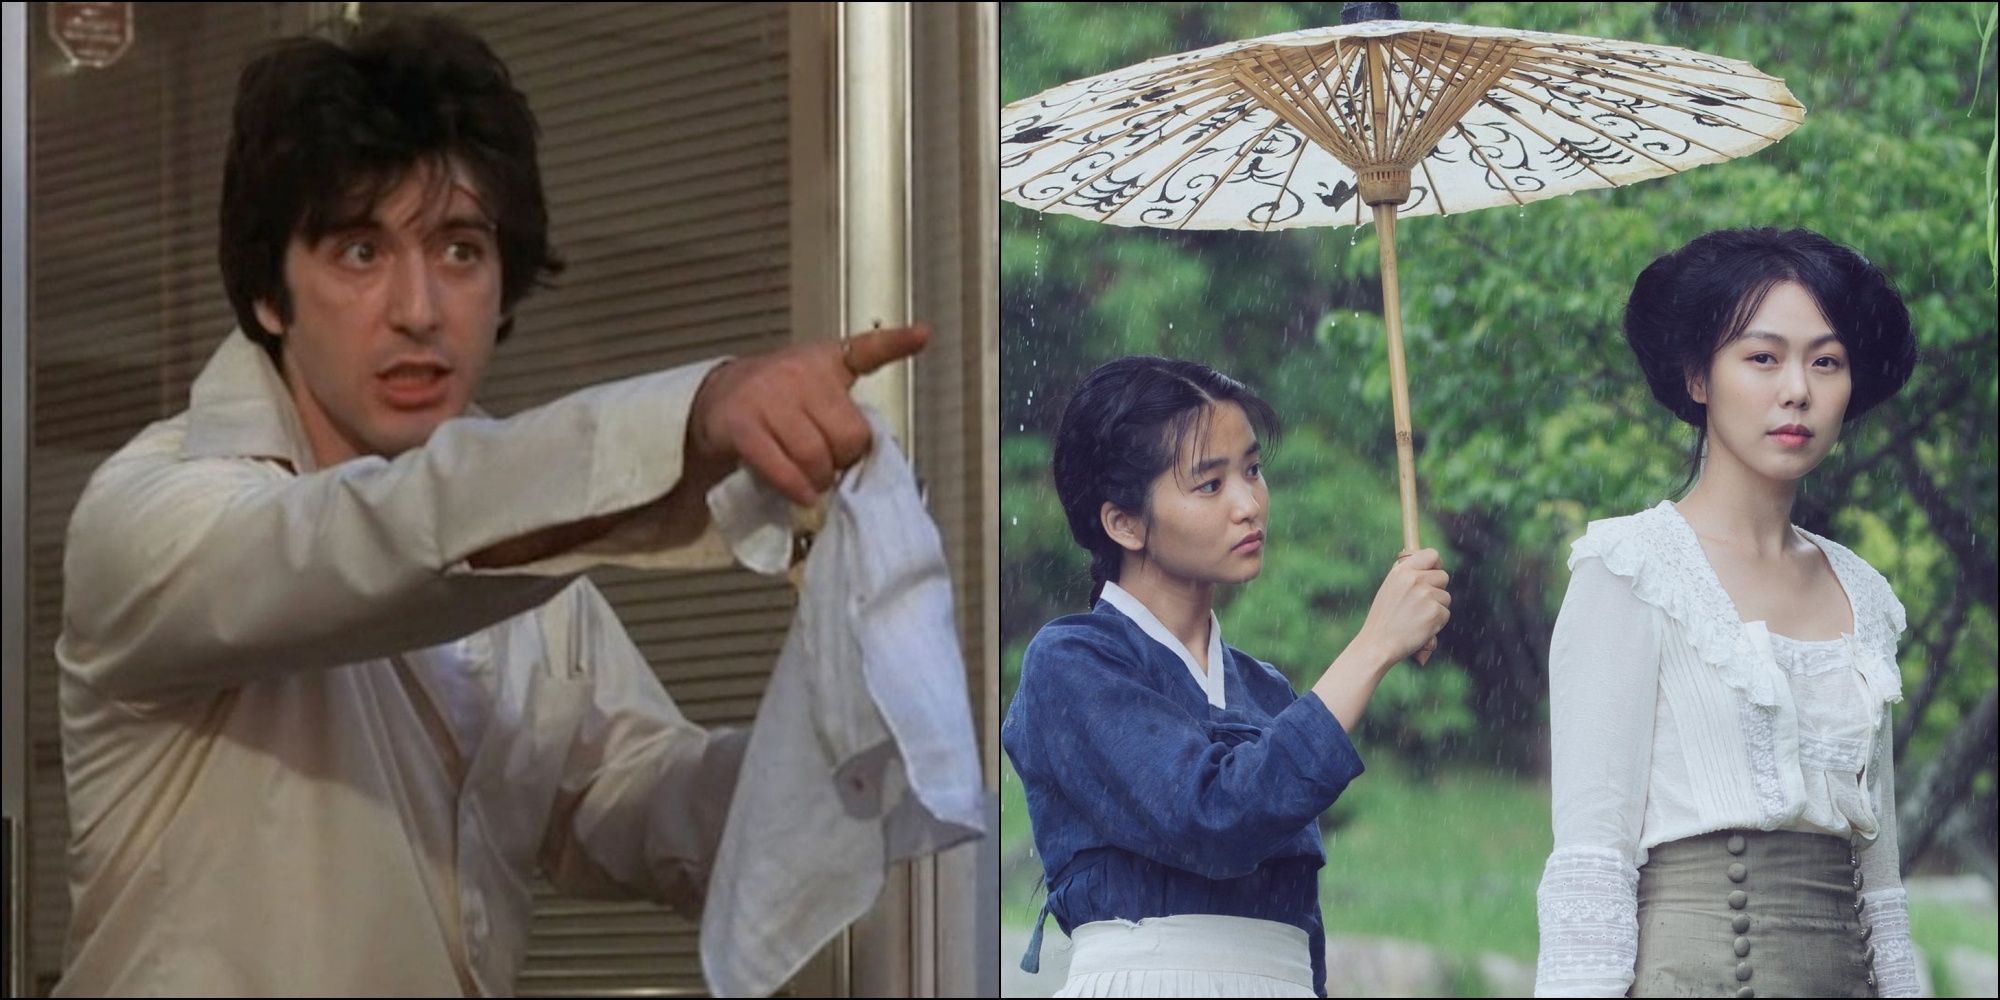 Dog Day Afternoon image on left and The Handmaiden on the right.